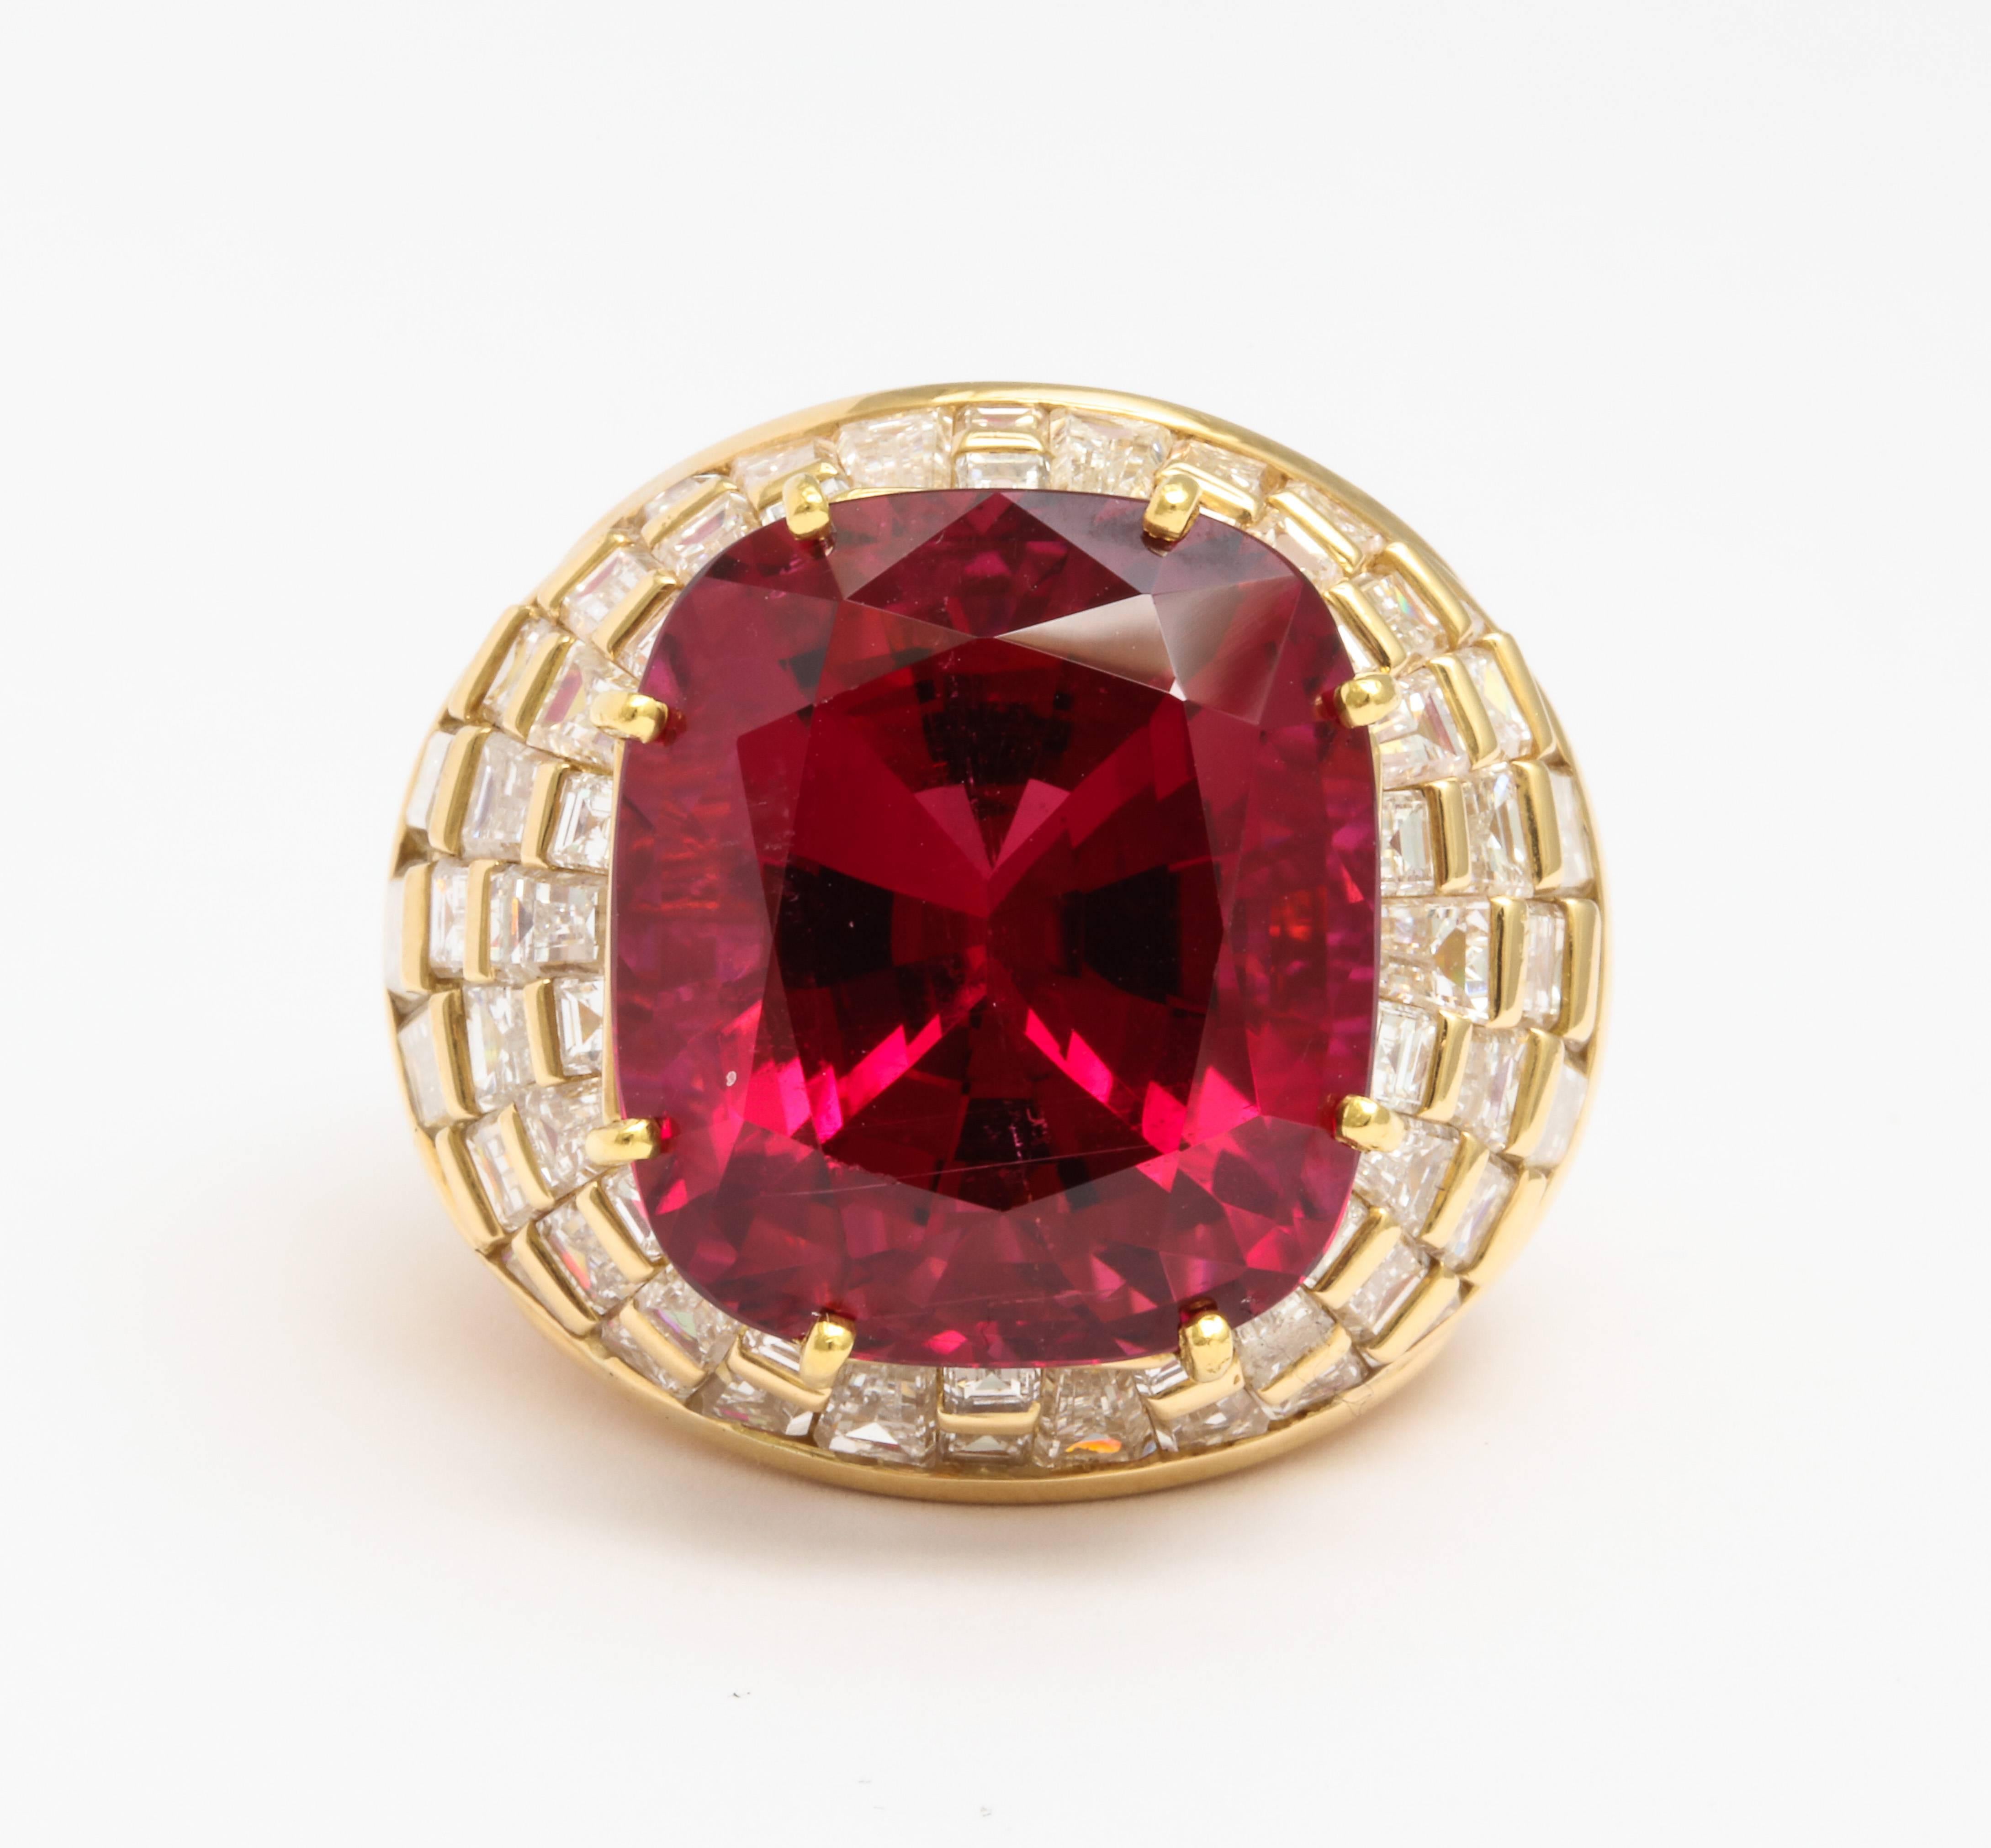 Superb Gem Rubellite Tourmaline and Diamond Ring by Oscar Heyman and Brothers

Perfect gem quality tourmaline weighin approx 28 carats

Oscar Heyman hallmarked and numbered 20896

Certificate of Authenticity available upon request